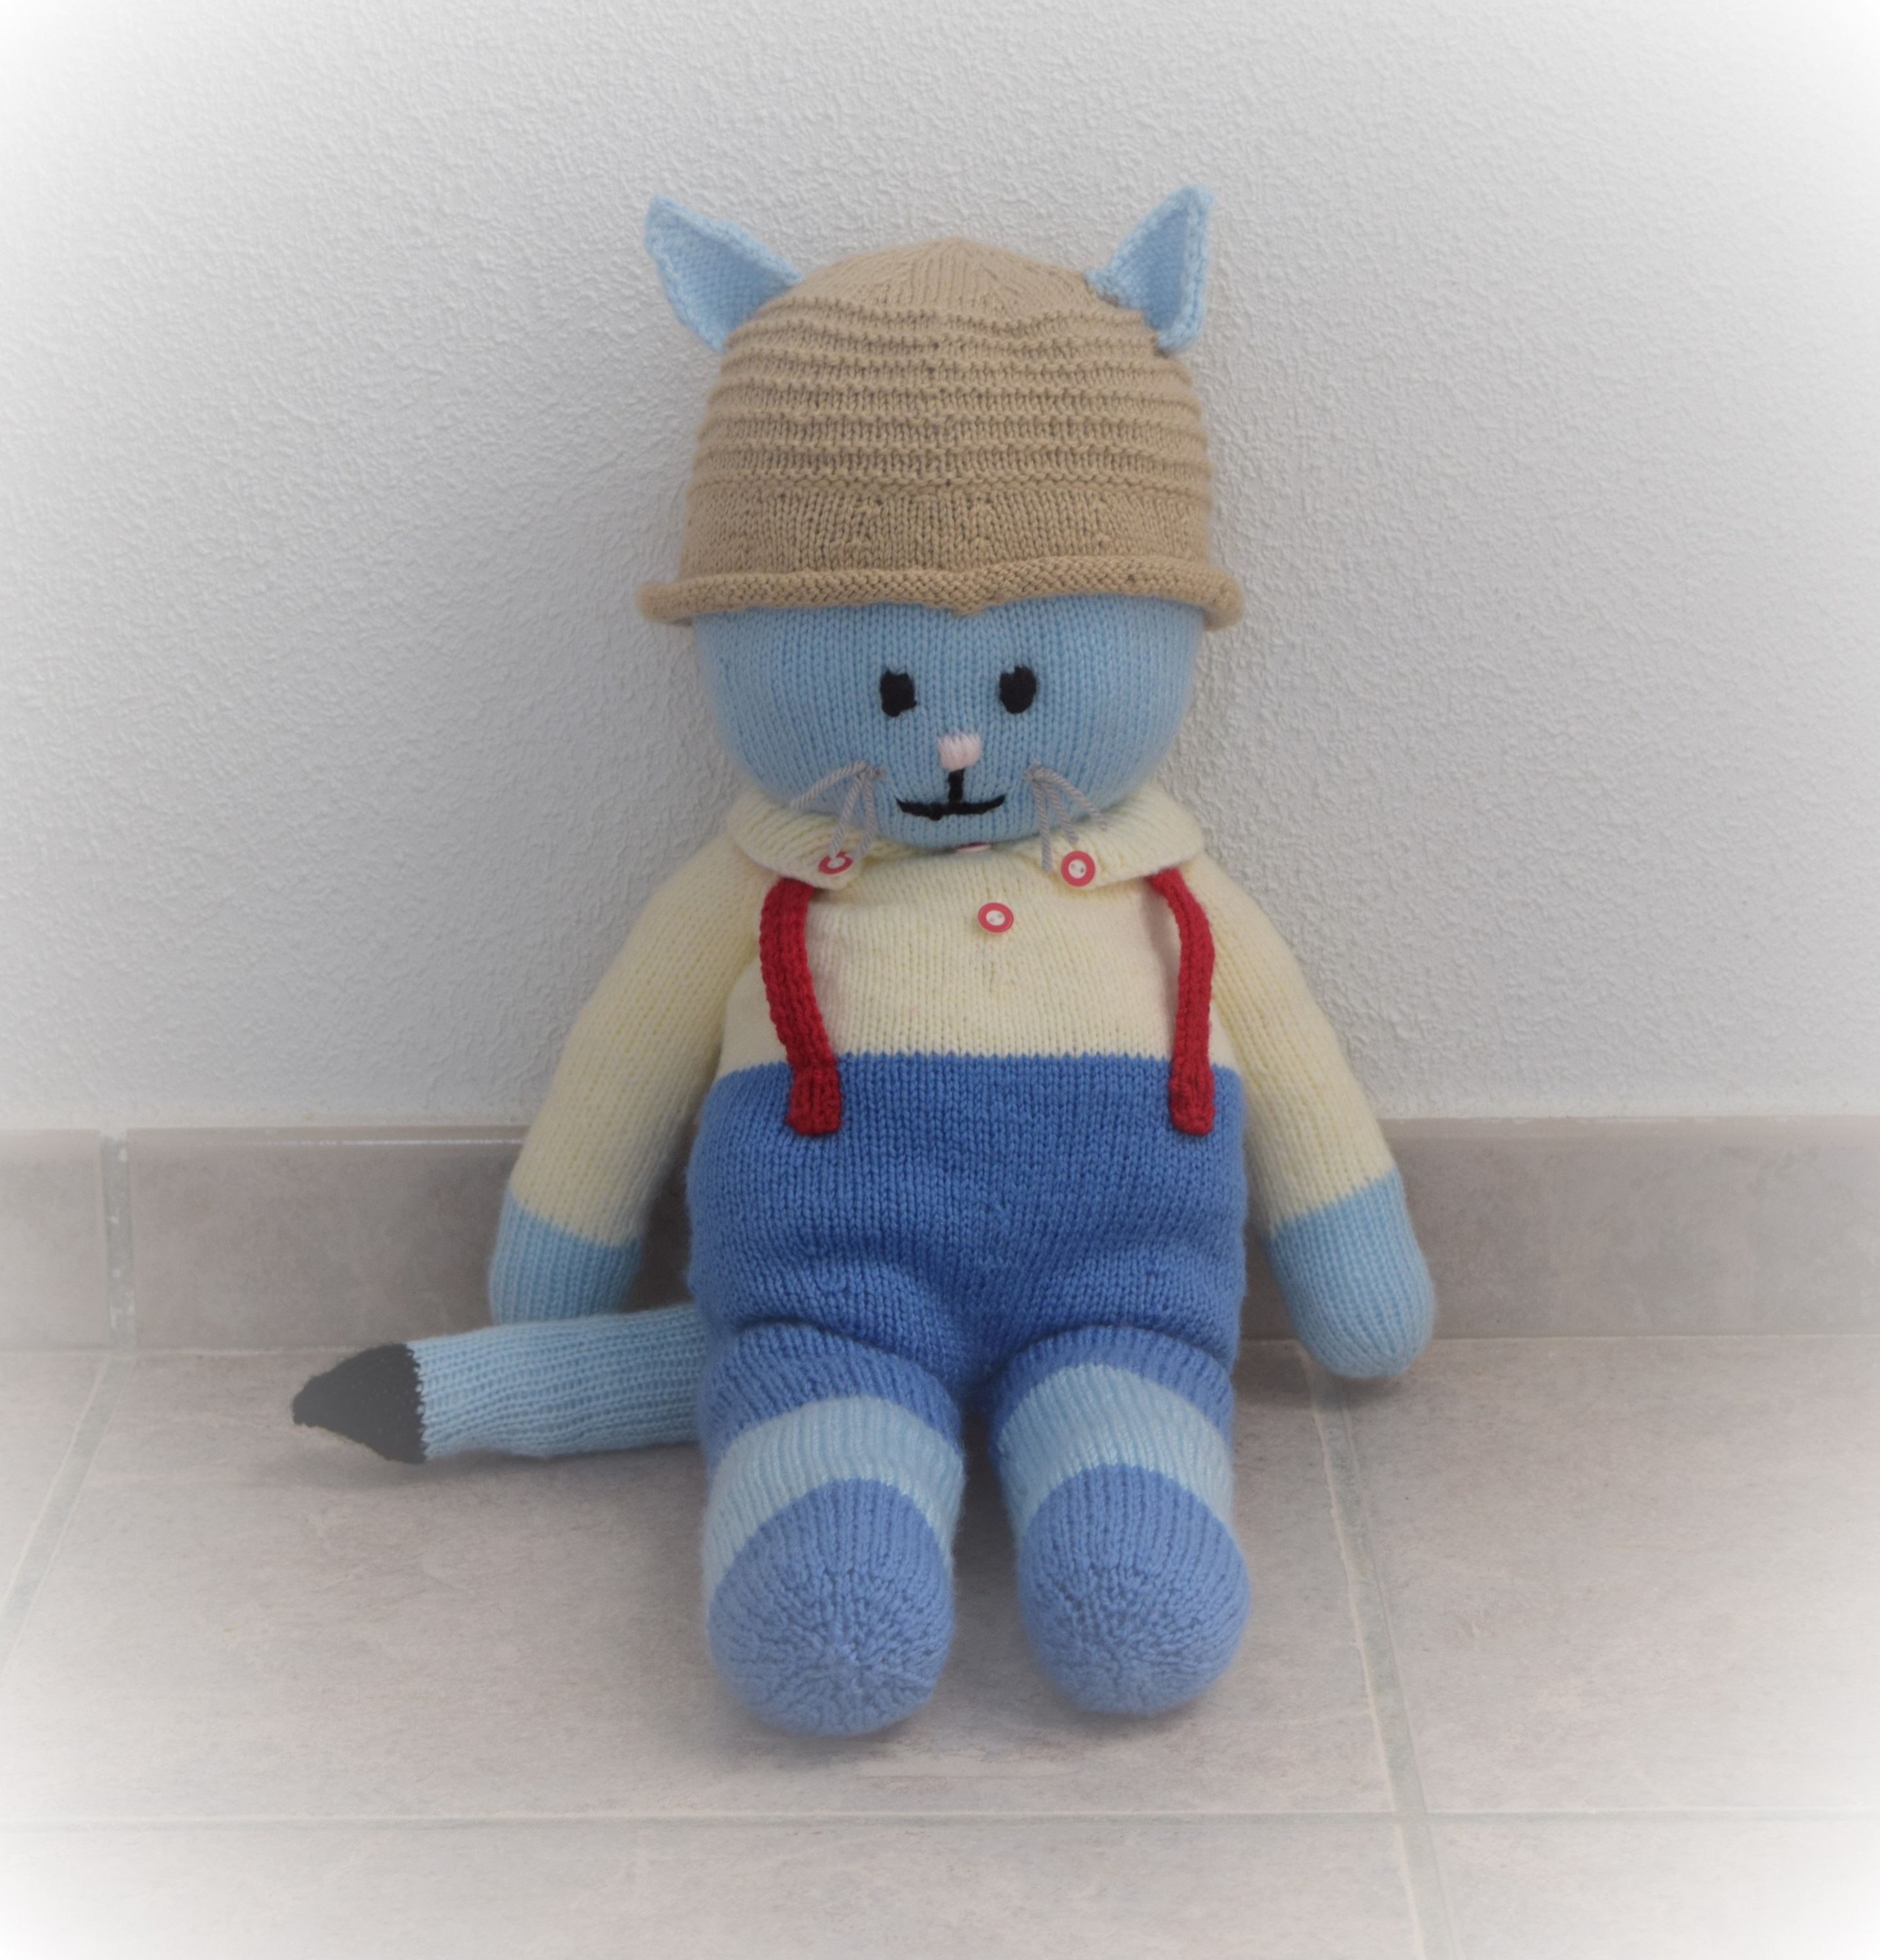 Knitting Patterns For Baby Toys Boy And Girl Cat Knitting Pattern Knitted Animal Toys Handmade